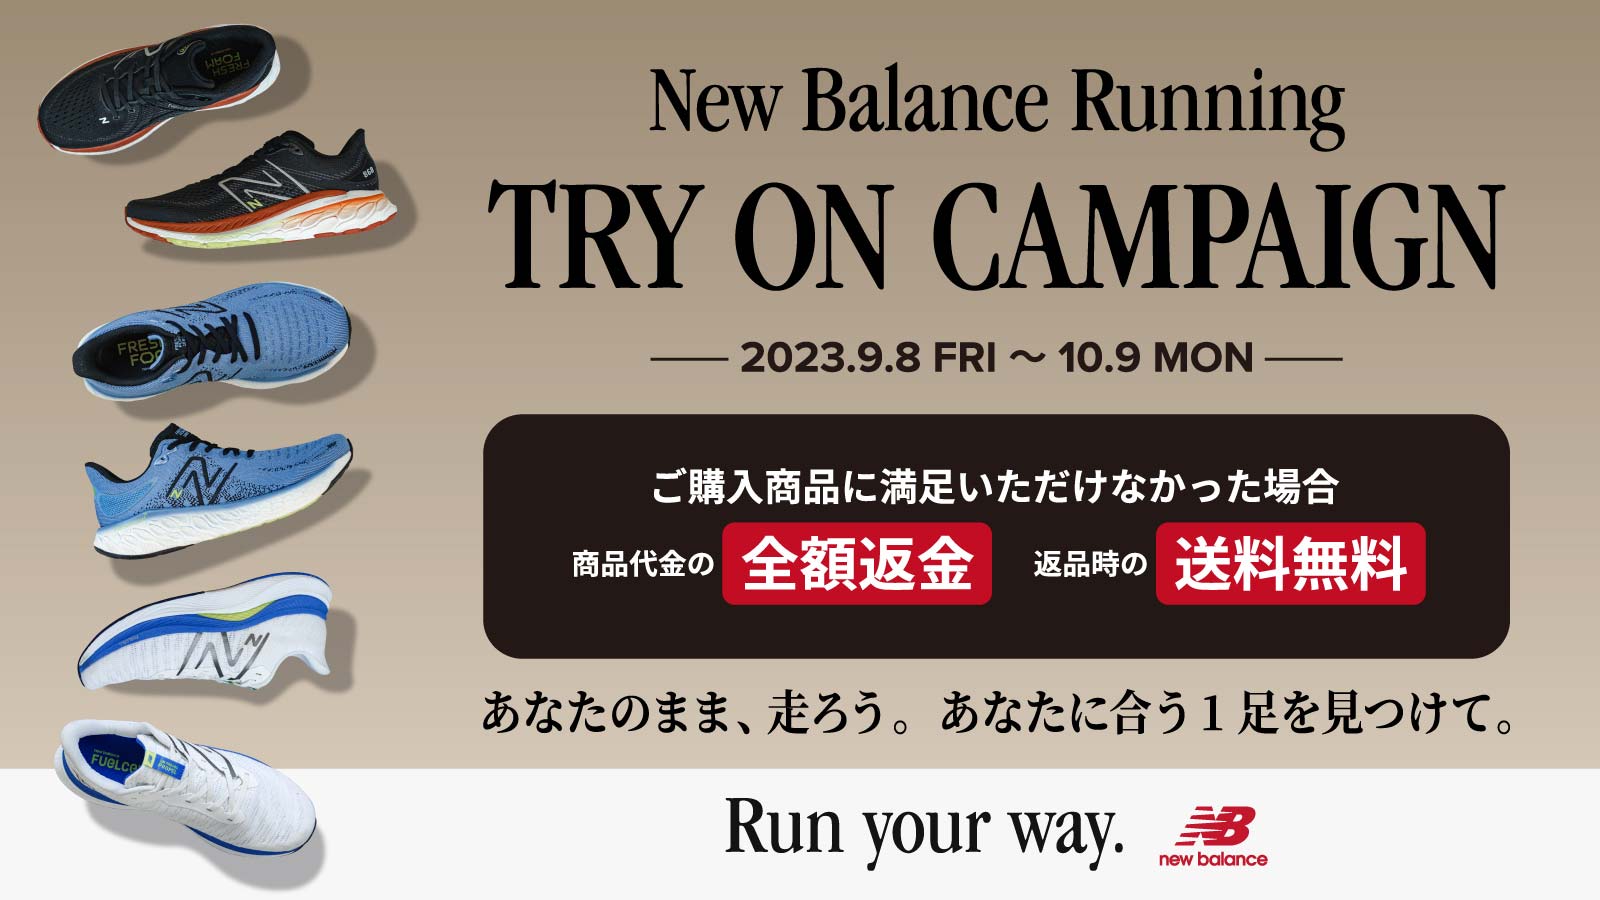 【New Balance（ニューバランス）】TRY ON CAMPAIGN